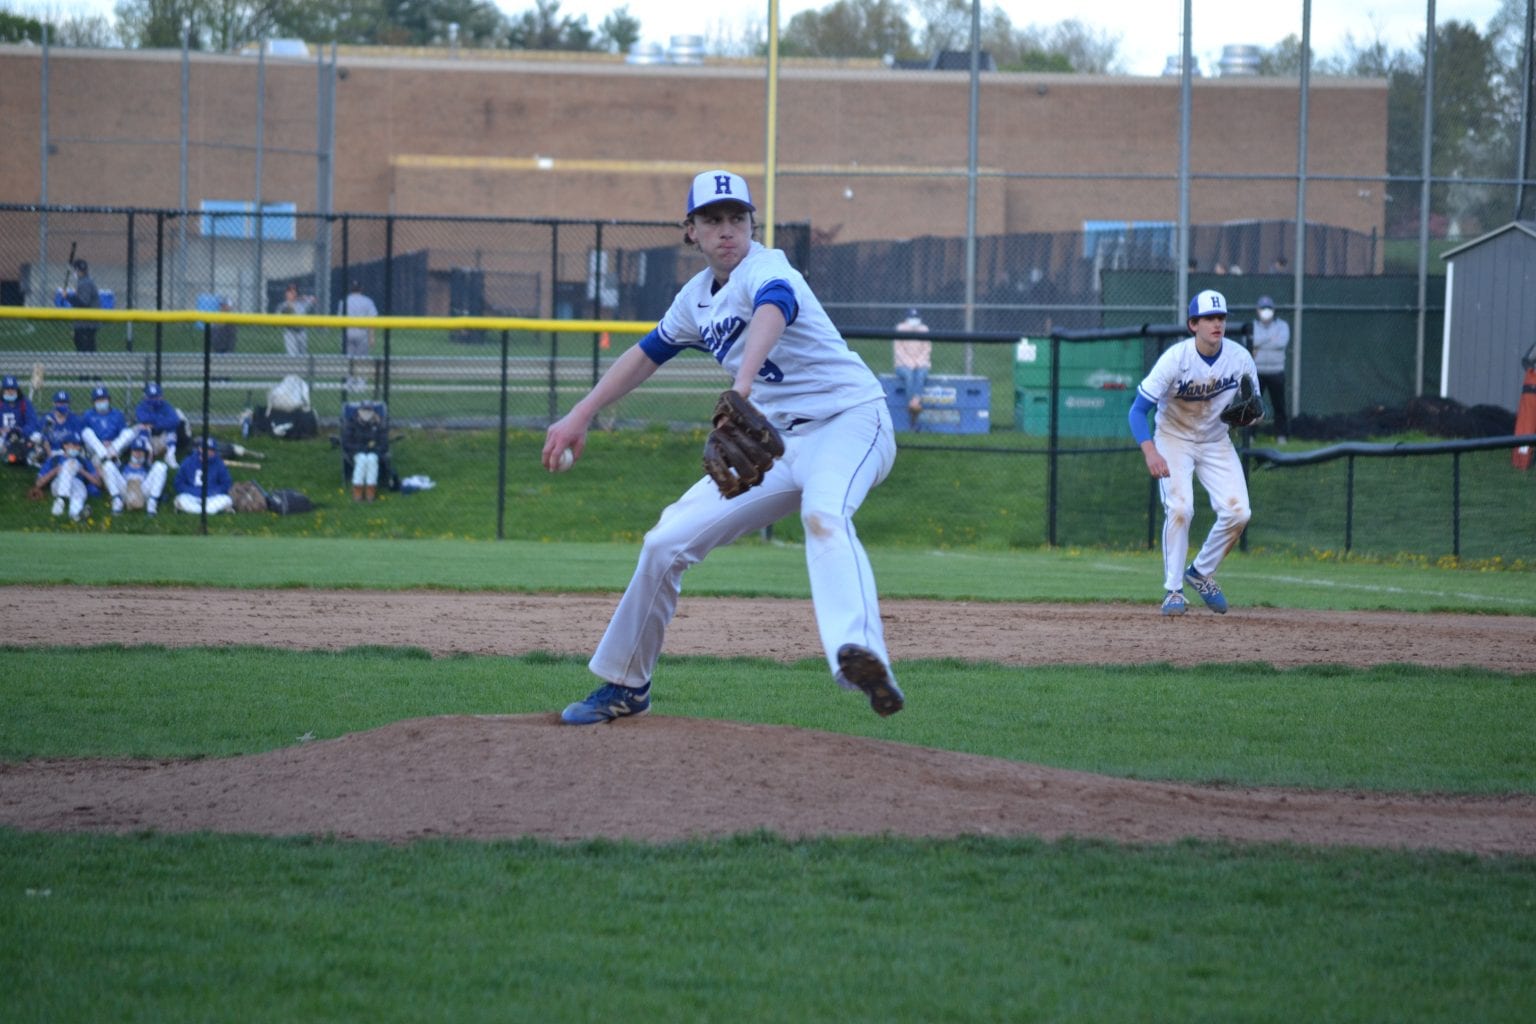 Udell's Pitching and Timely Hitting Help Hall Baseball Overcome ...